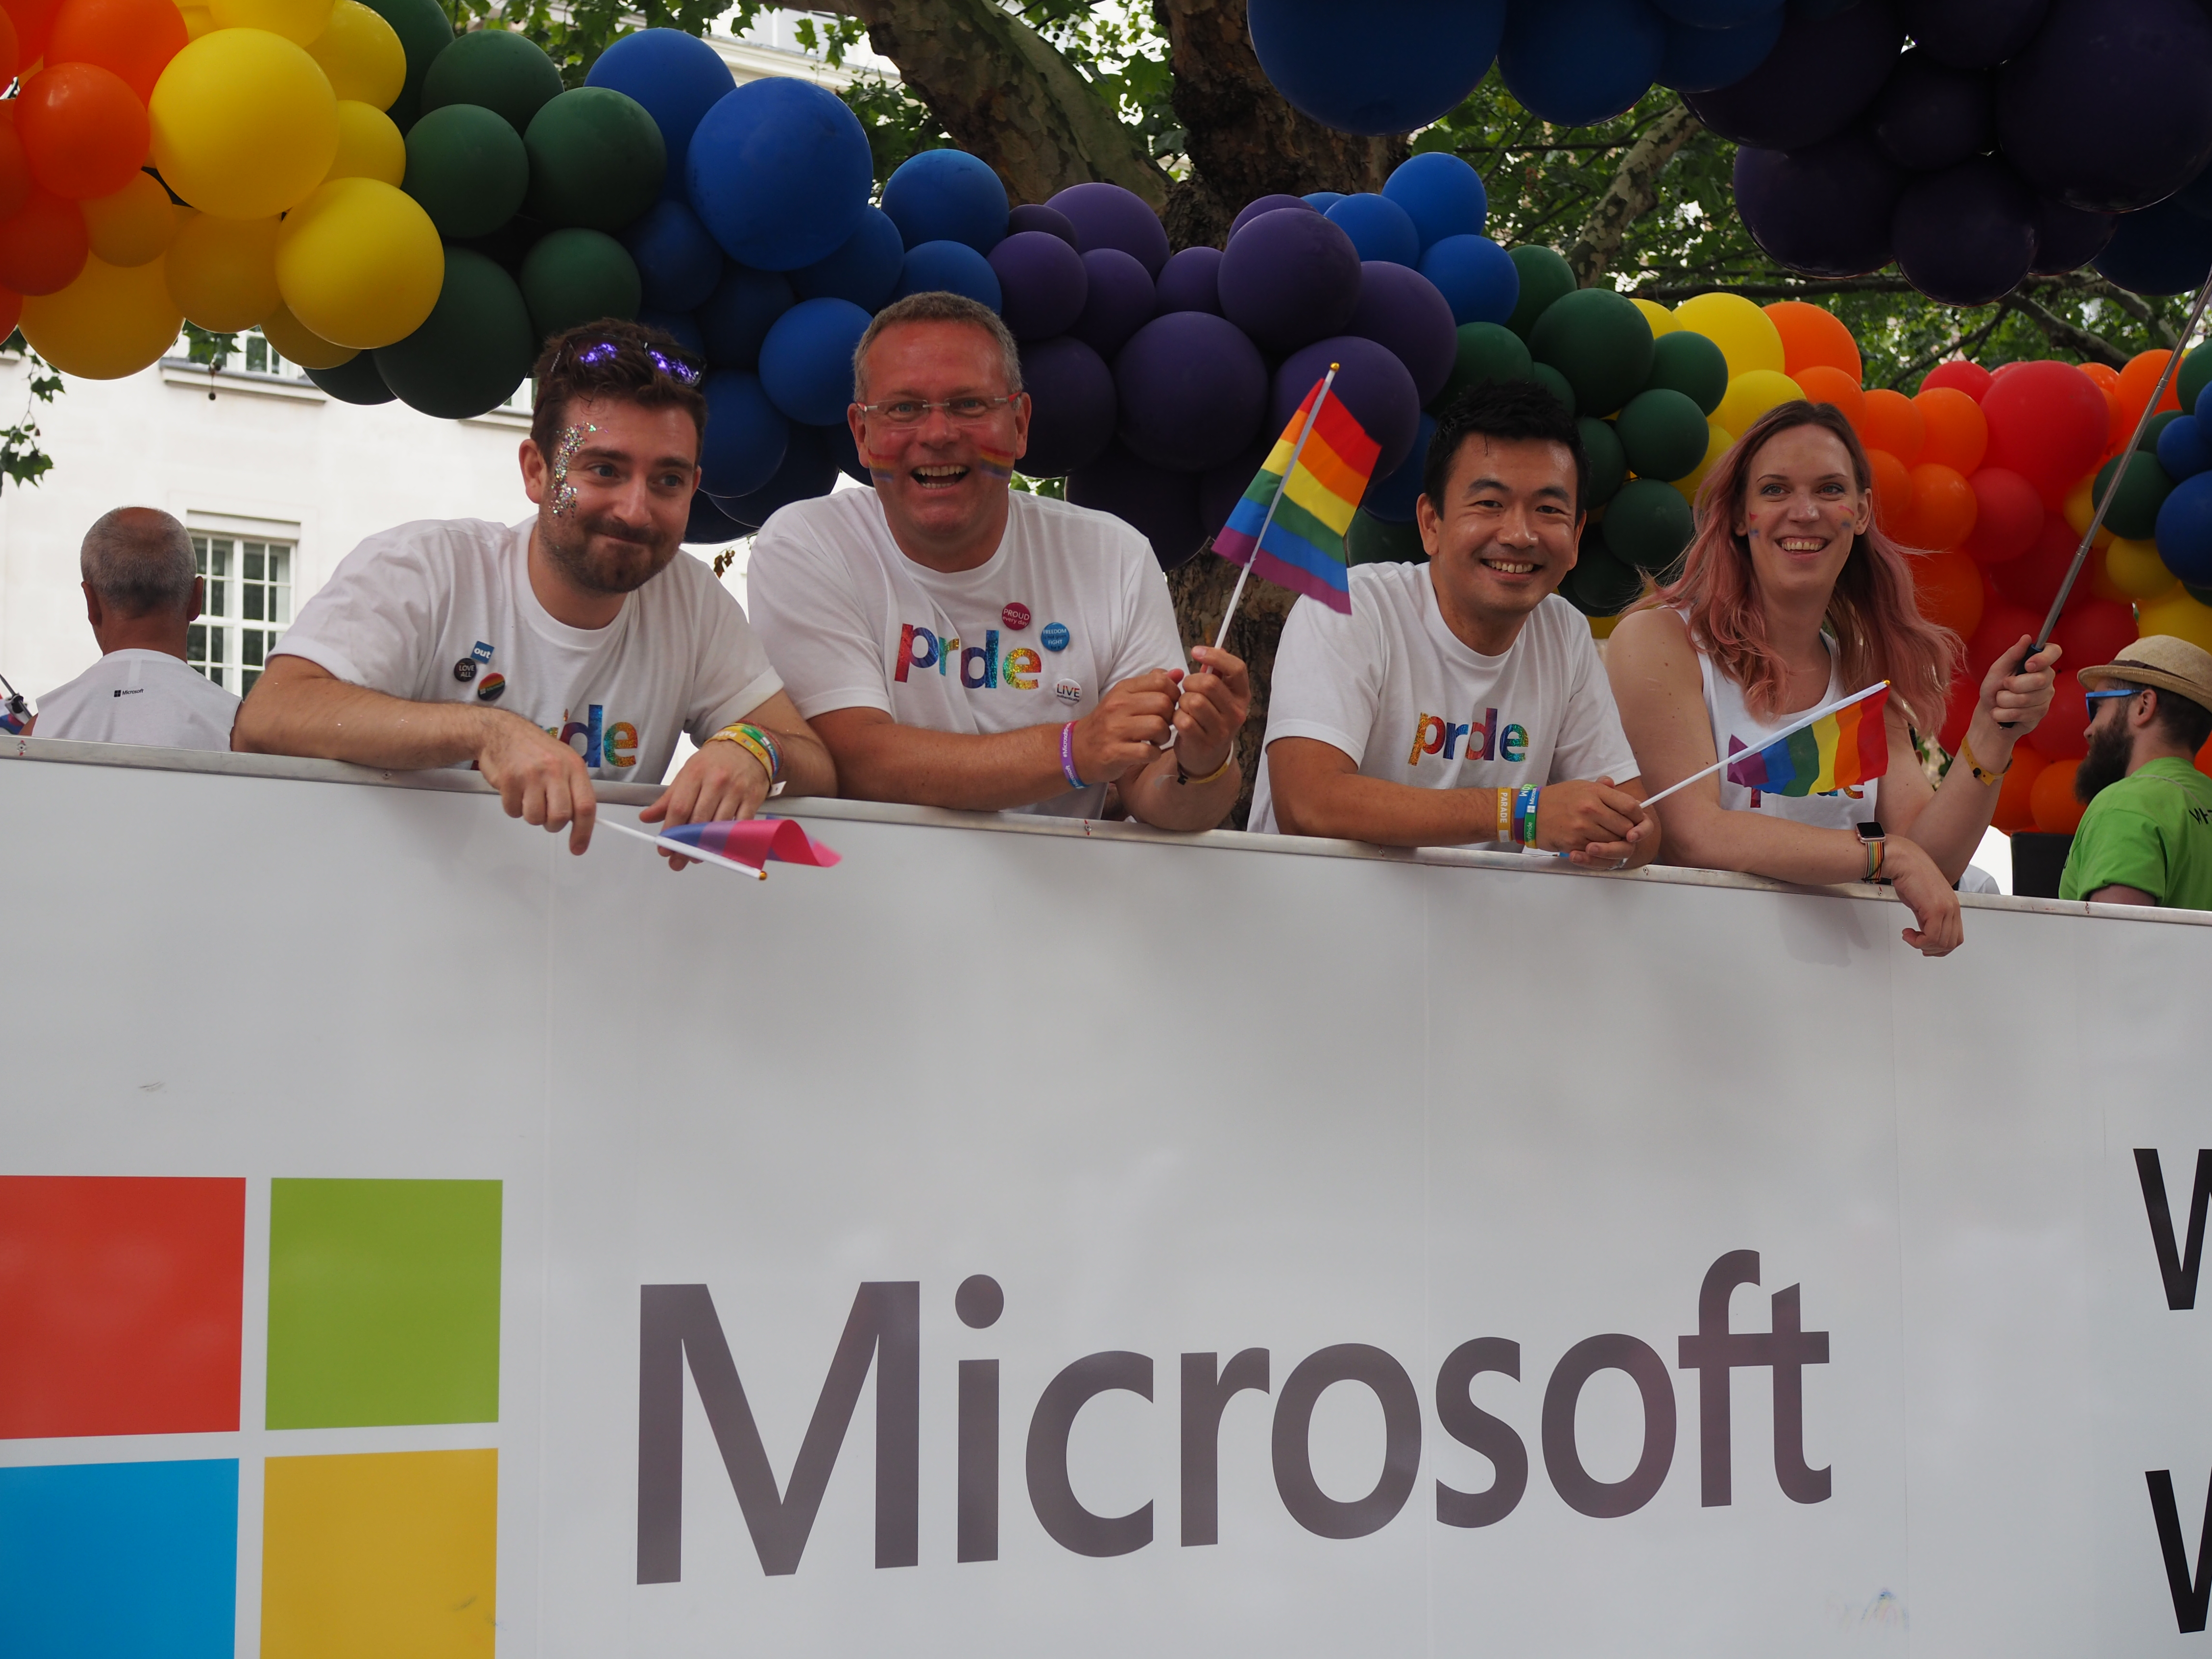 Microsoft staff on the company float at PRIDE